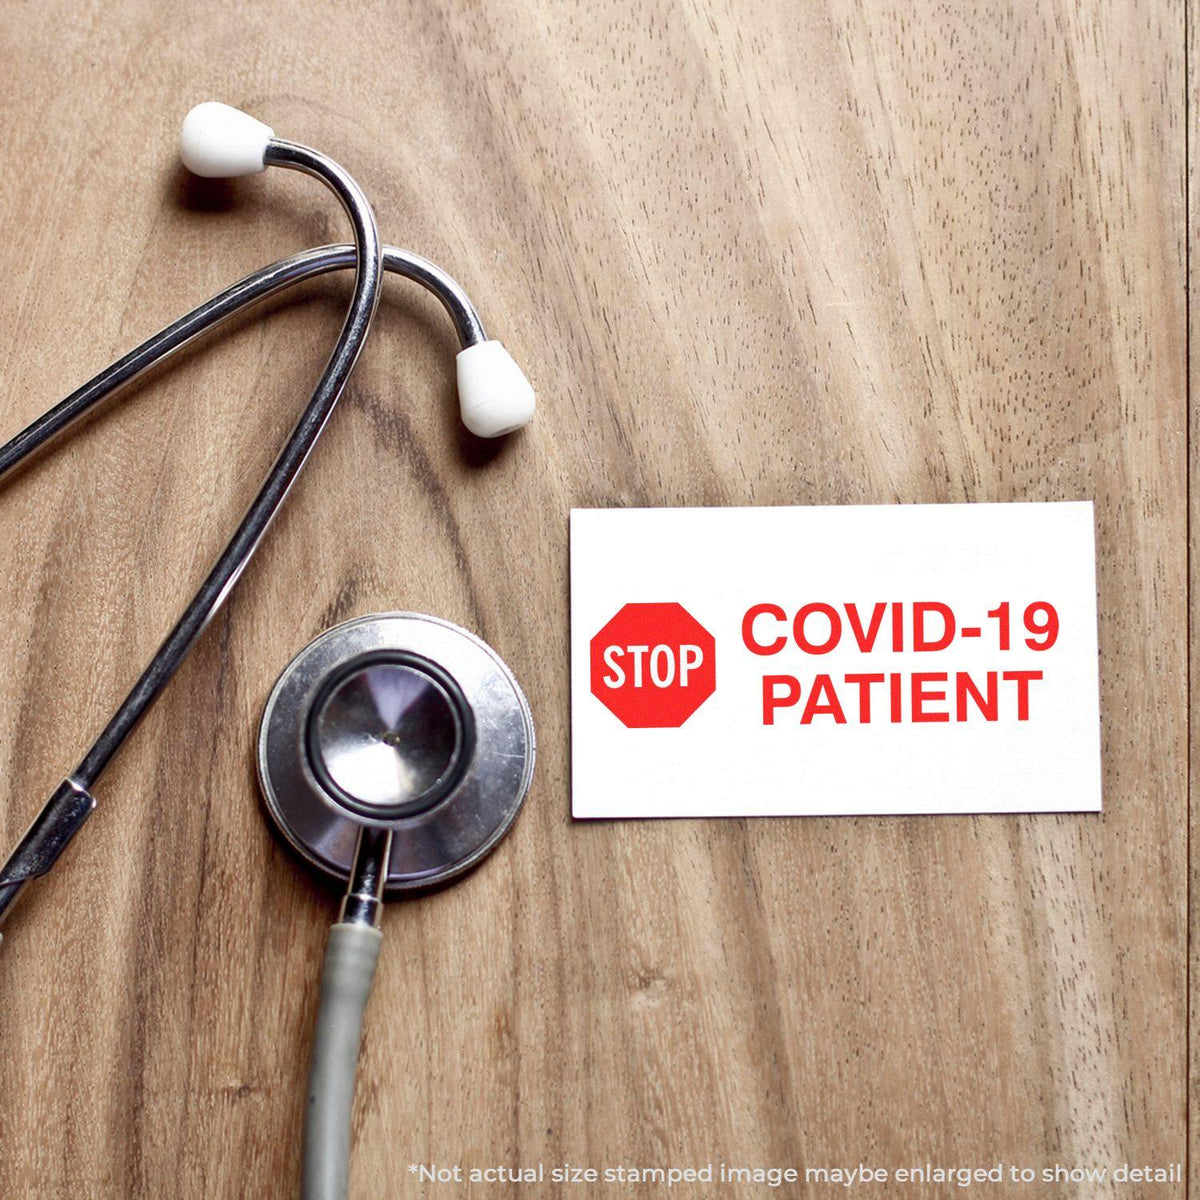 In Use Stop Covid Patient Rubber Stamp Image